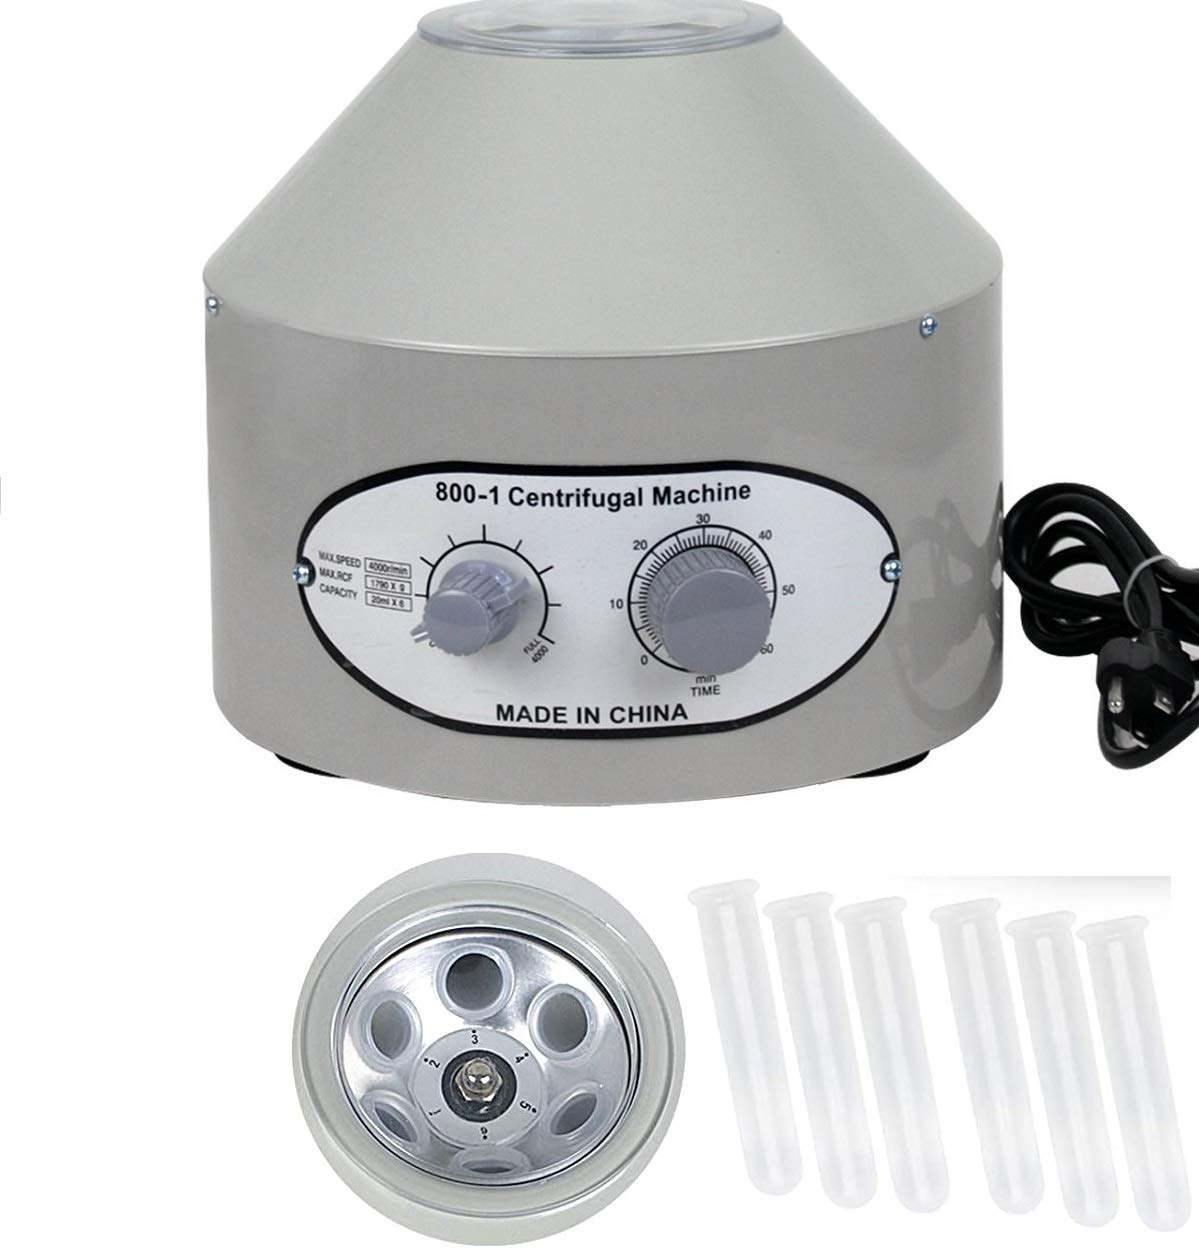 cALU LUKY Desktop Electric Lab Laboratory Centrifuge Machine Lab Medical Practice Wtimer And Speed Control - Low Speed,4000 Rpm, Capacity